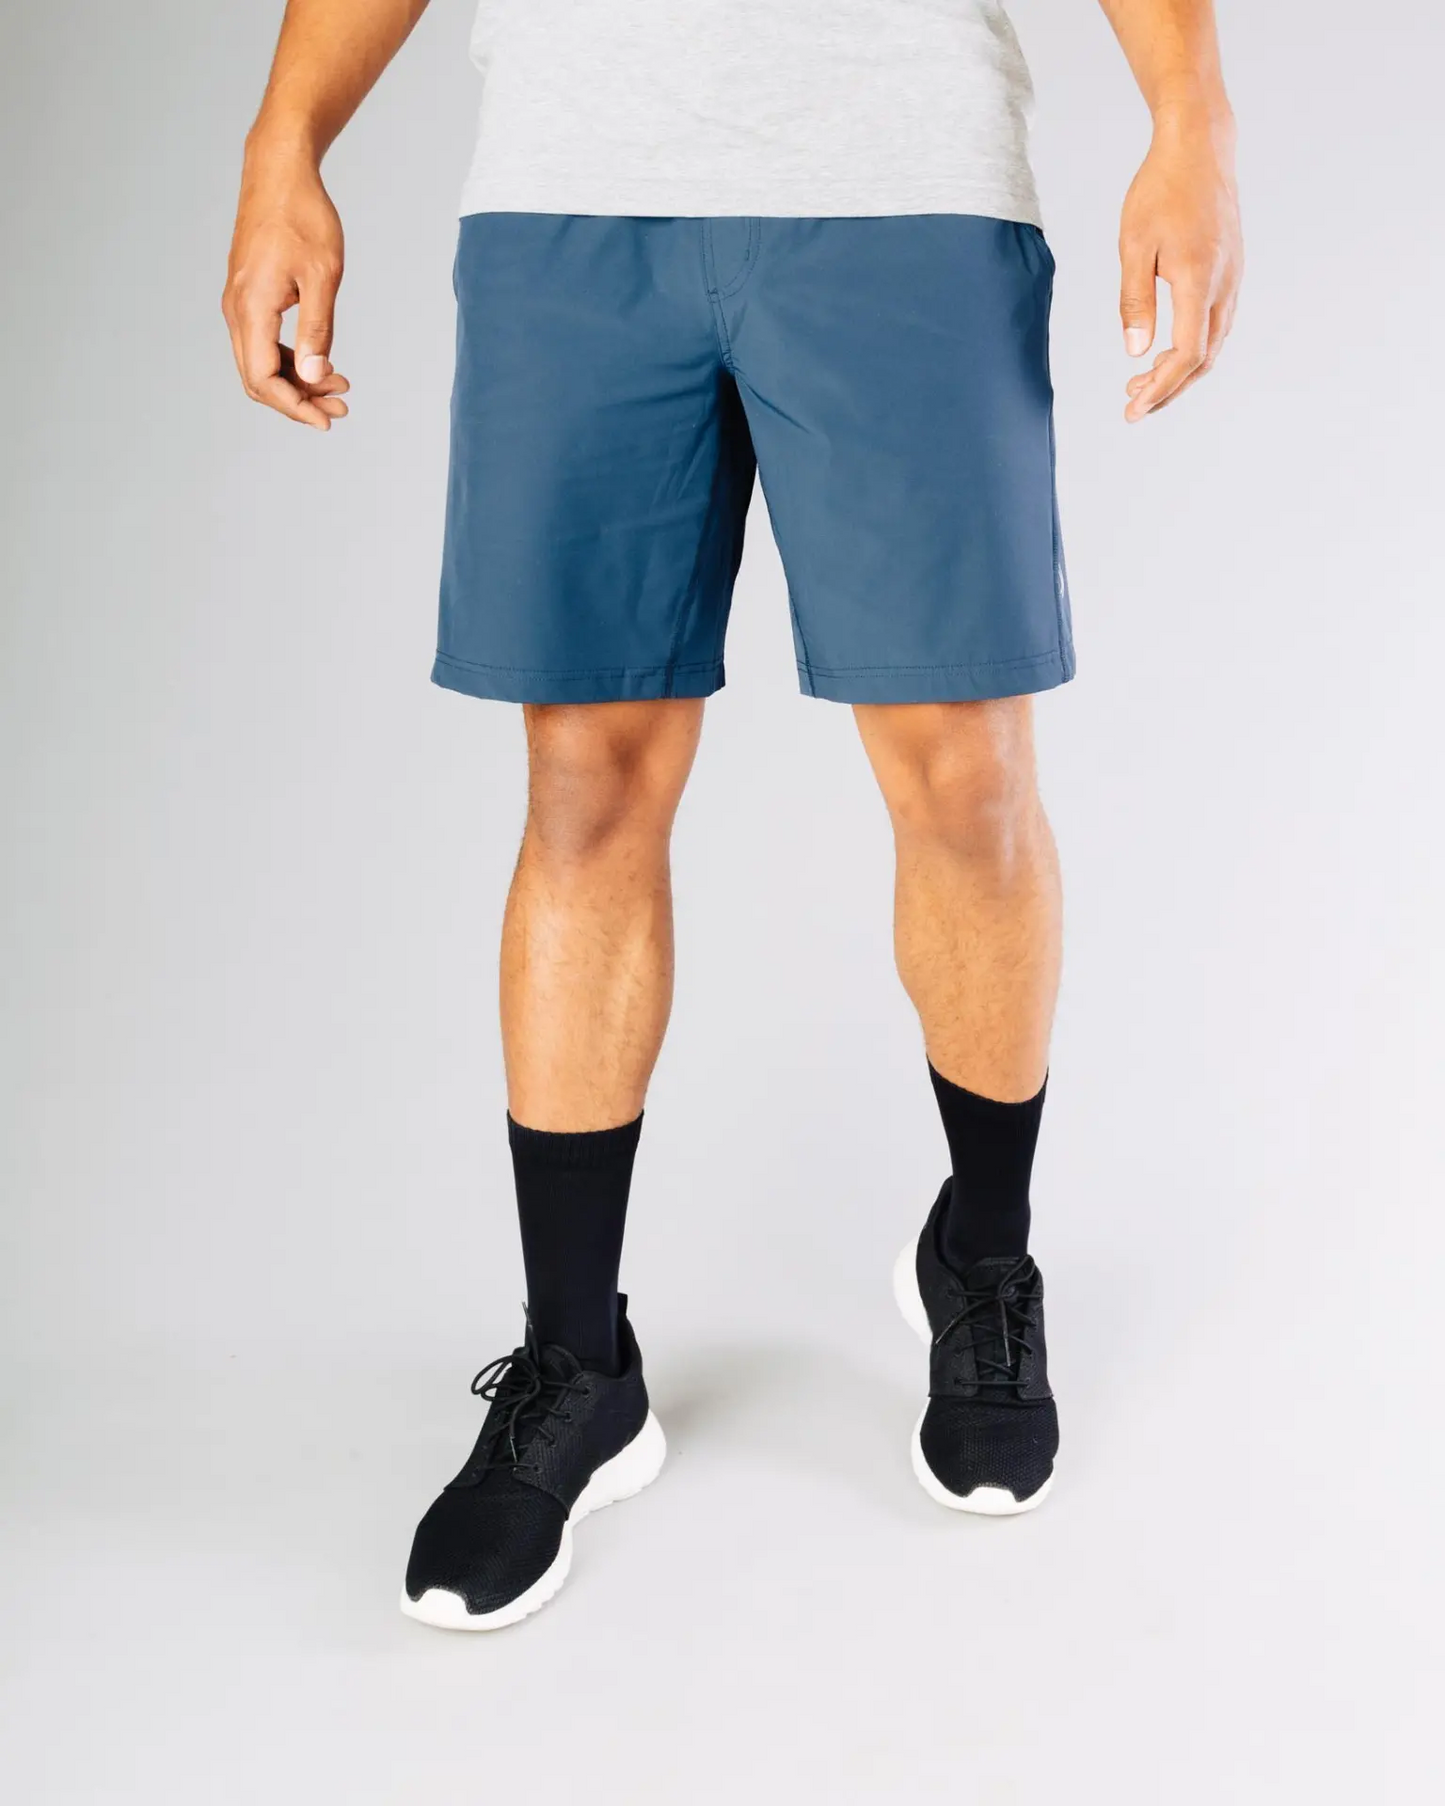 Mako Blue Bright Shorts - Stylish and Comfy Shorts for Men | Made in USA